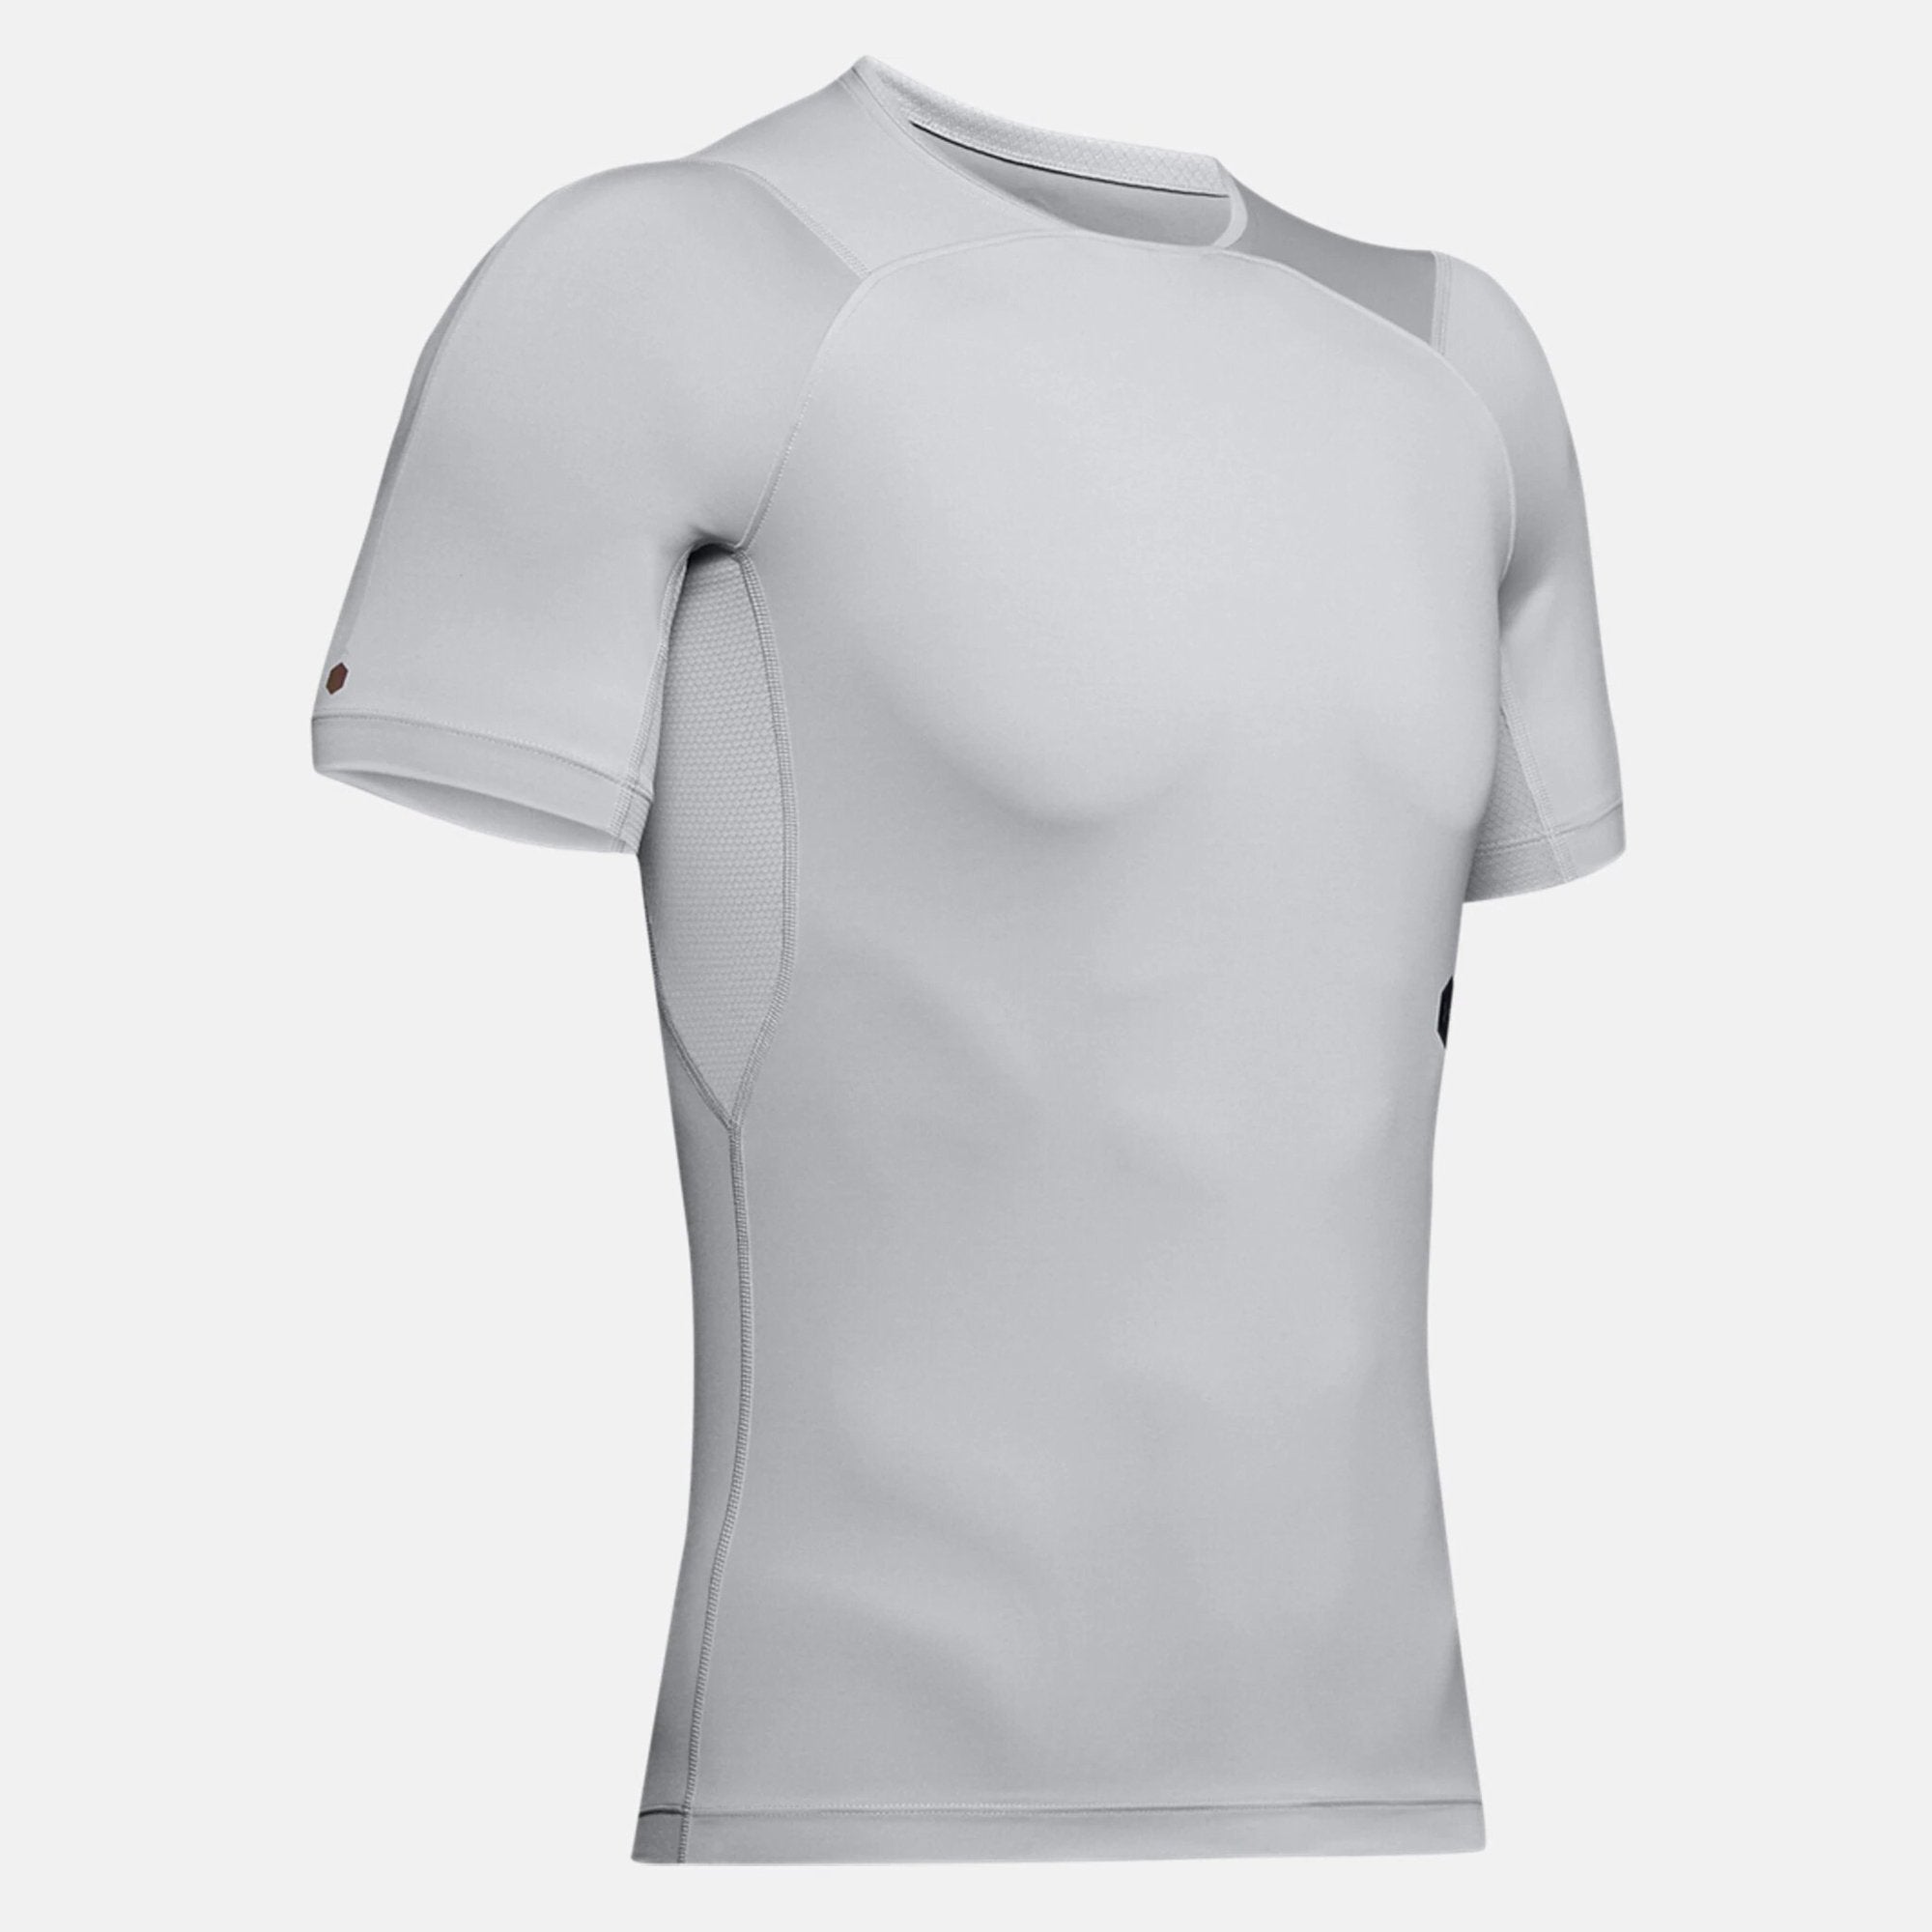 mens cheap under armour clothing